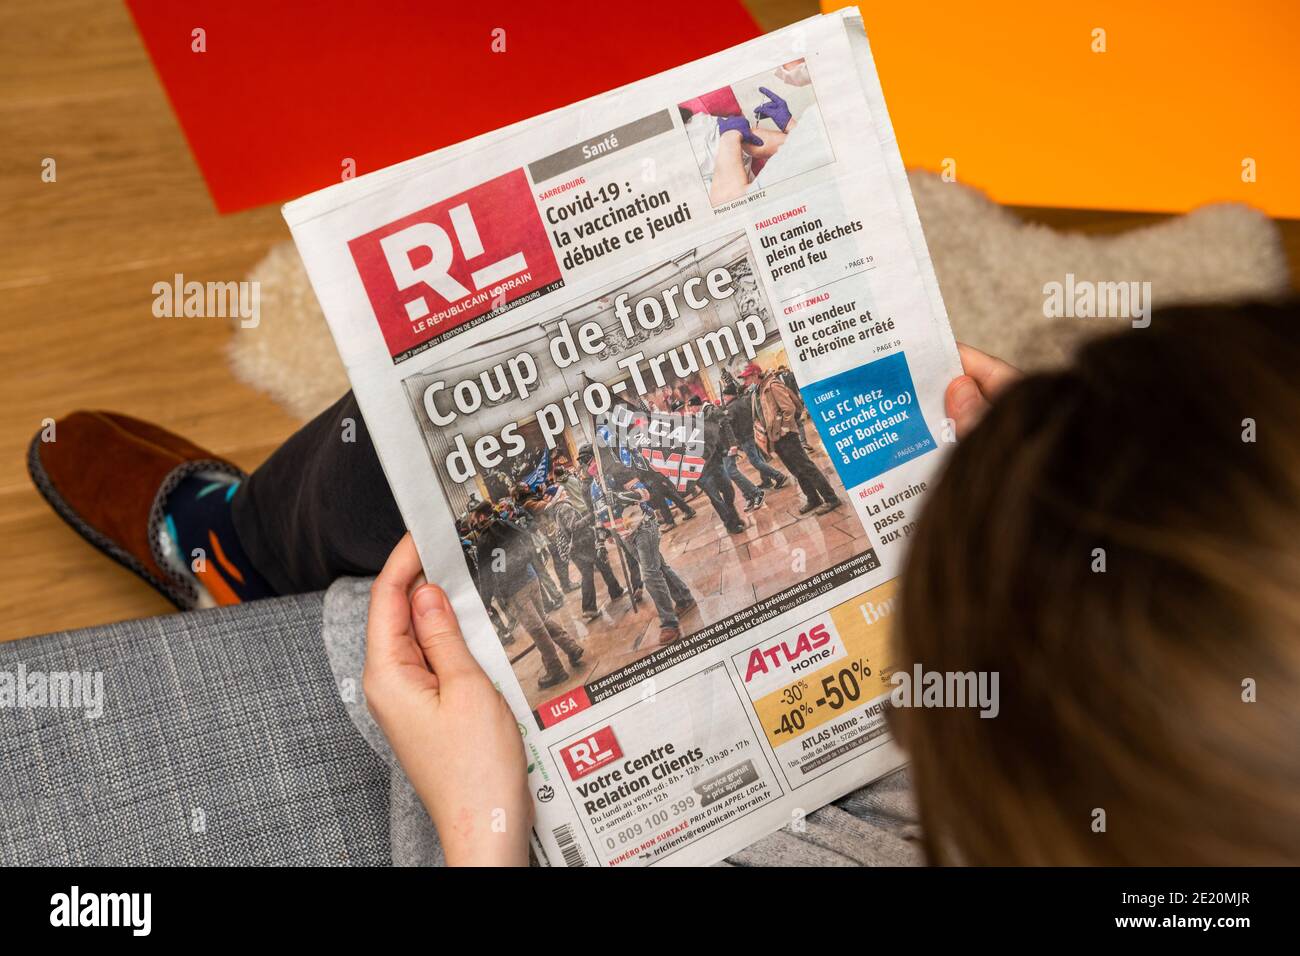 Paris, France - Jan 7, 2020: Woman reading French newspaper Le republicain Lorrain front page show storming of the U.S. Capitol by supporters of U.S. President Donald Trump on January 07, 2021 Stock Photo